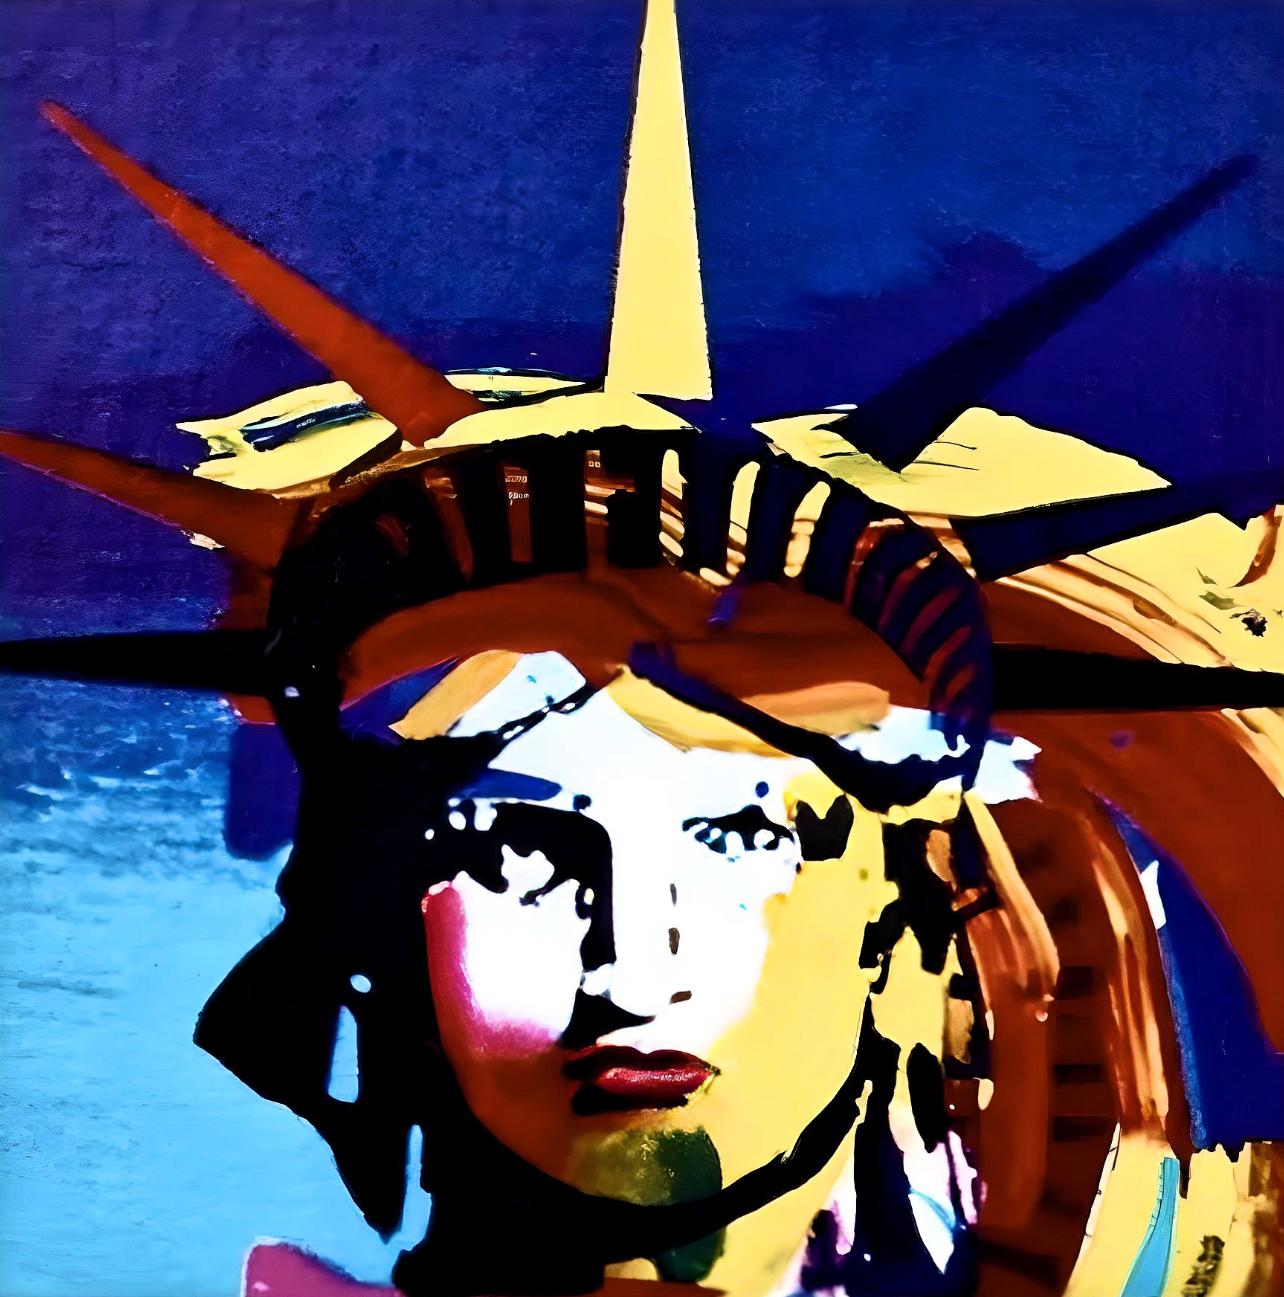 Artist: Peter Max (1937)
Title: Liberty Head VII
Year: 2003
Edition: 451/500, plus proofs
Medium: Lithograph on Lustro Saxony paper
Size: 3.43 x 2.62 inches
Condition: Excellent
Inscription: Signed and numbered by the artist.
Notes: Published by Via